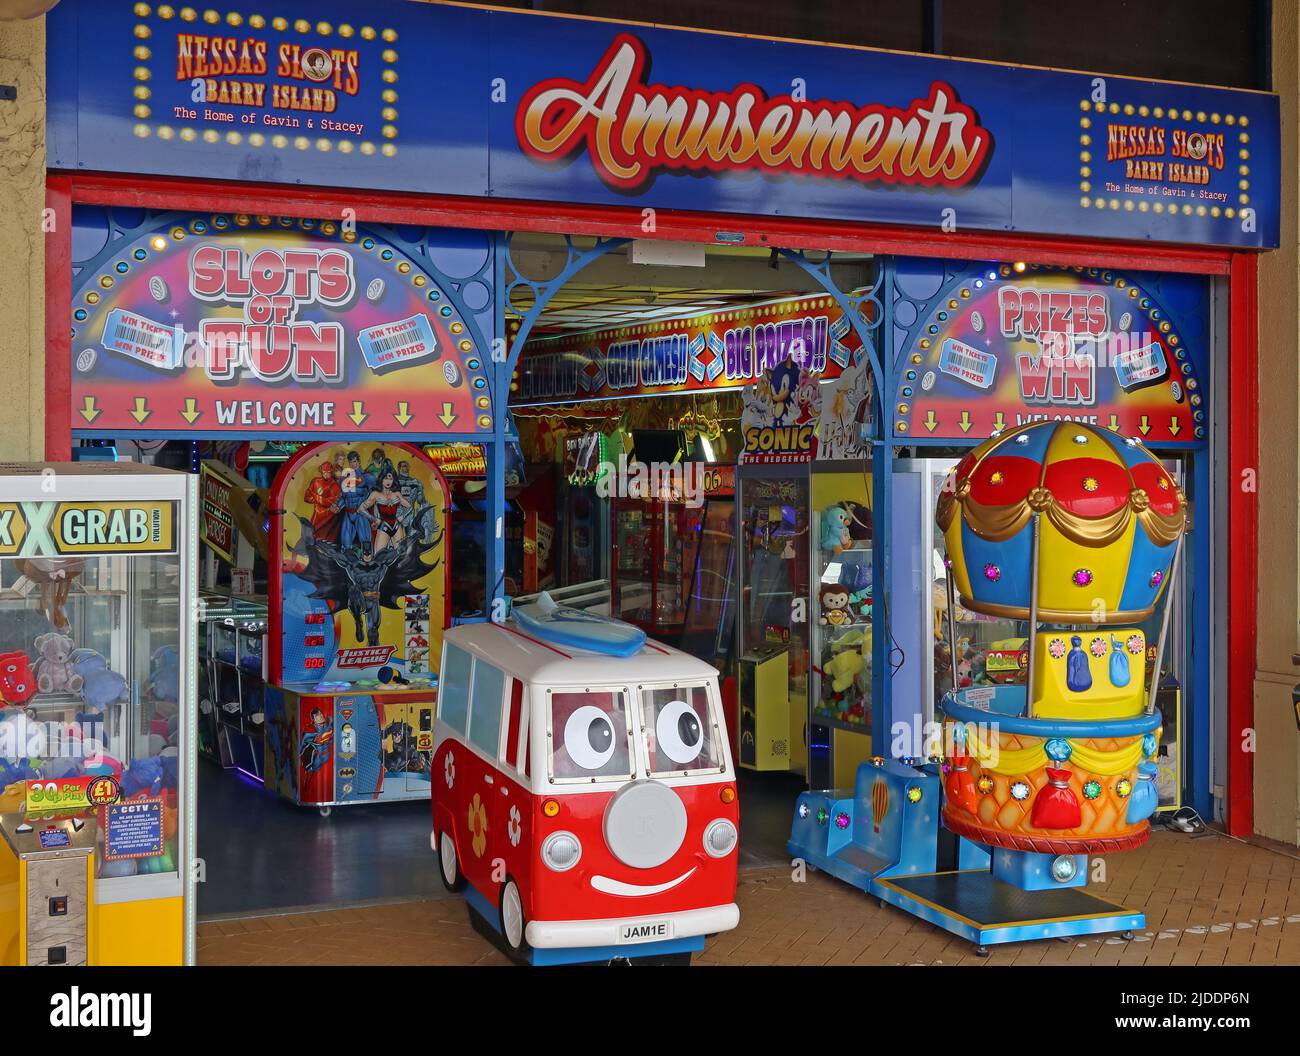 Nessas Slots, Amusements, 11 Paget Road, Barry Island, Vale of Glamorgan, South Wales Seaside, Royaume-Uni, CF62 5TQ Banque D'Images